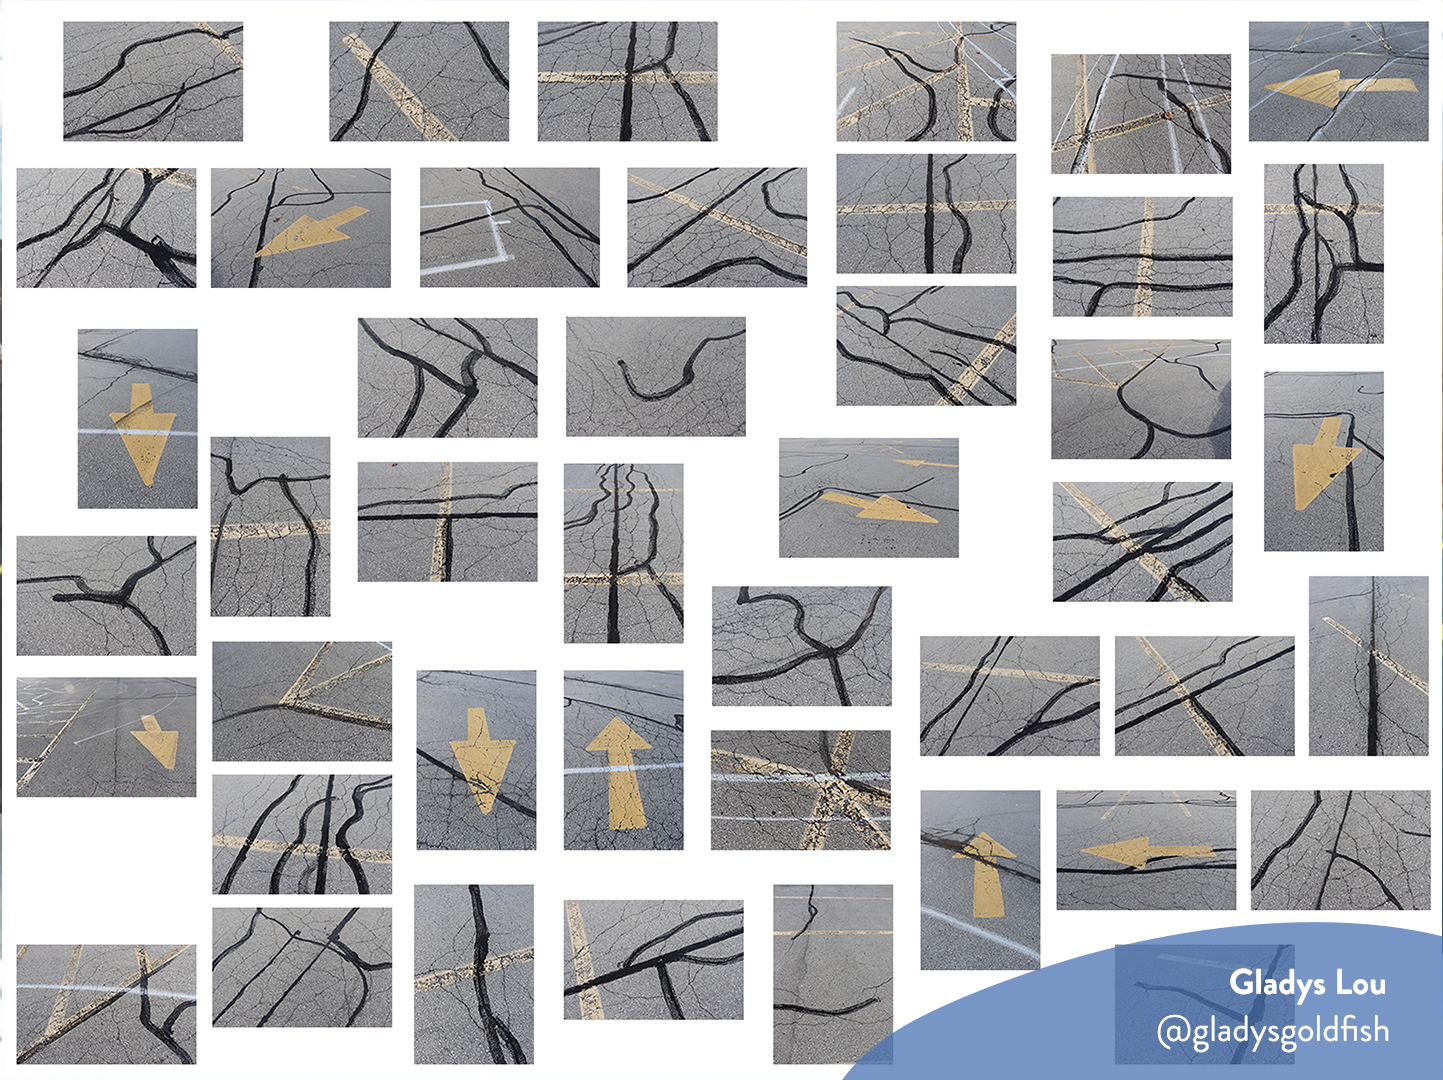 Collage of photos of a road and parking lot with yellow arrows and painted lines with cracked. There is a watermark with the name of the artist’s name “Gladys Lou” and their Instagram handle (@gladysgoldfish).